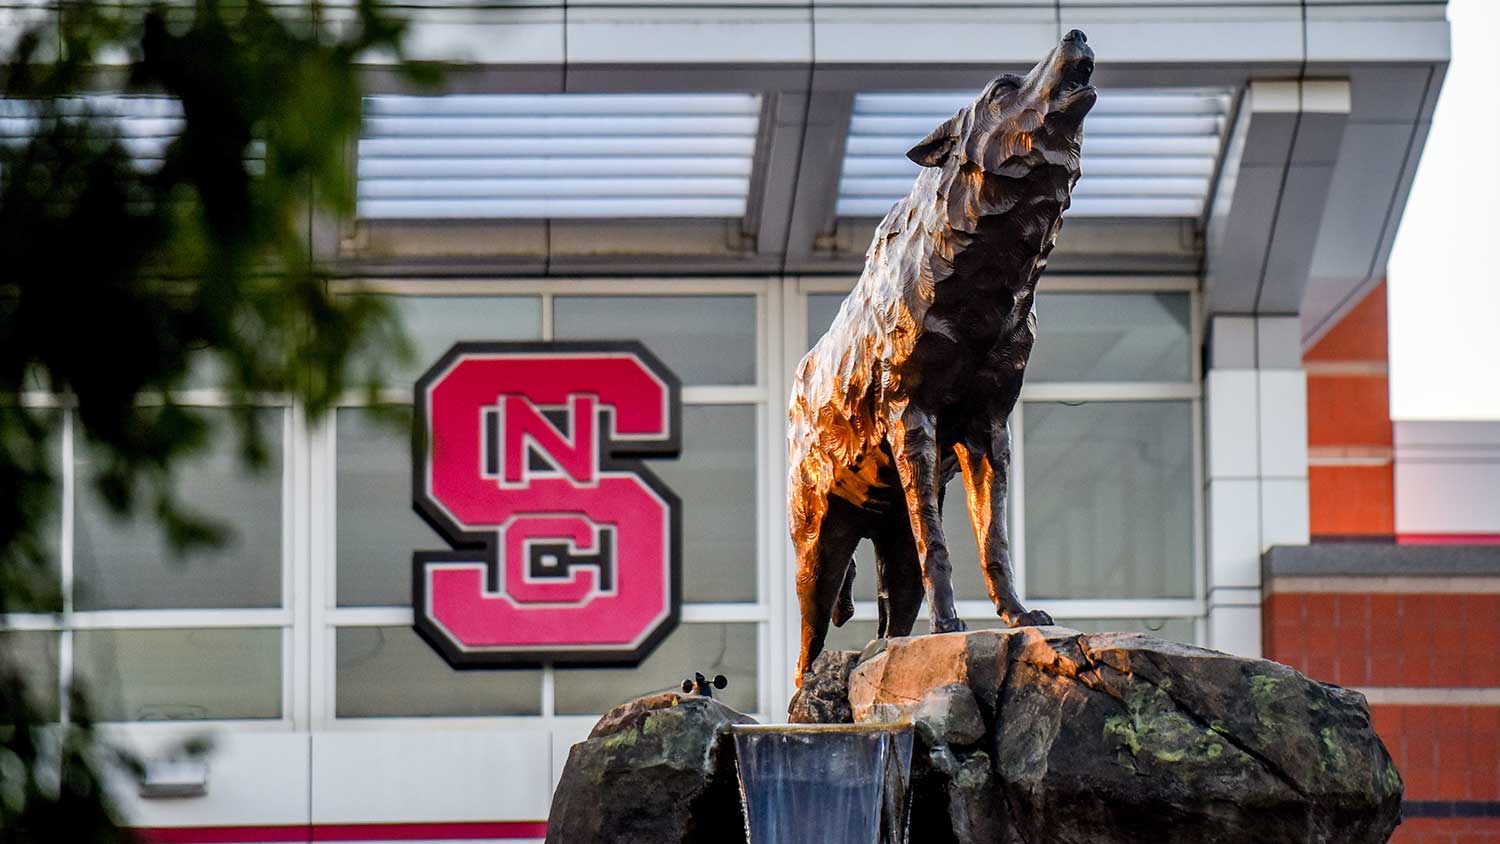 The wolf statue in front of Carter-Finley